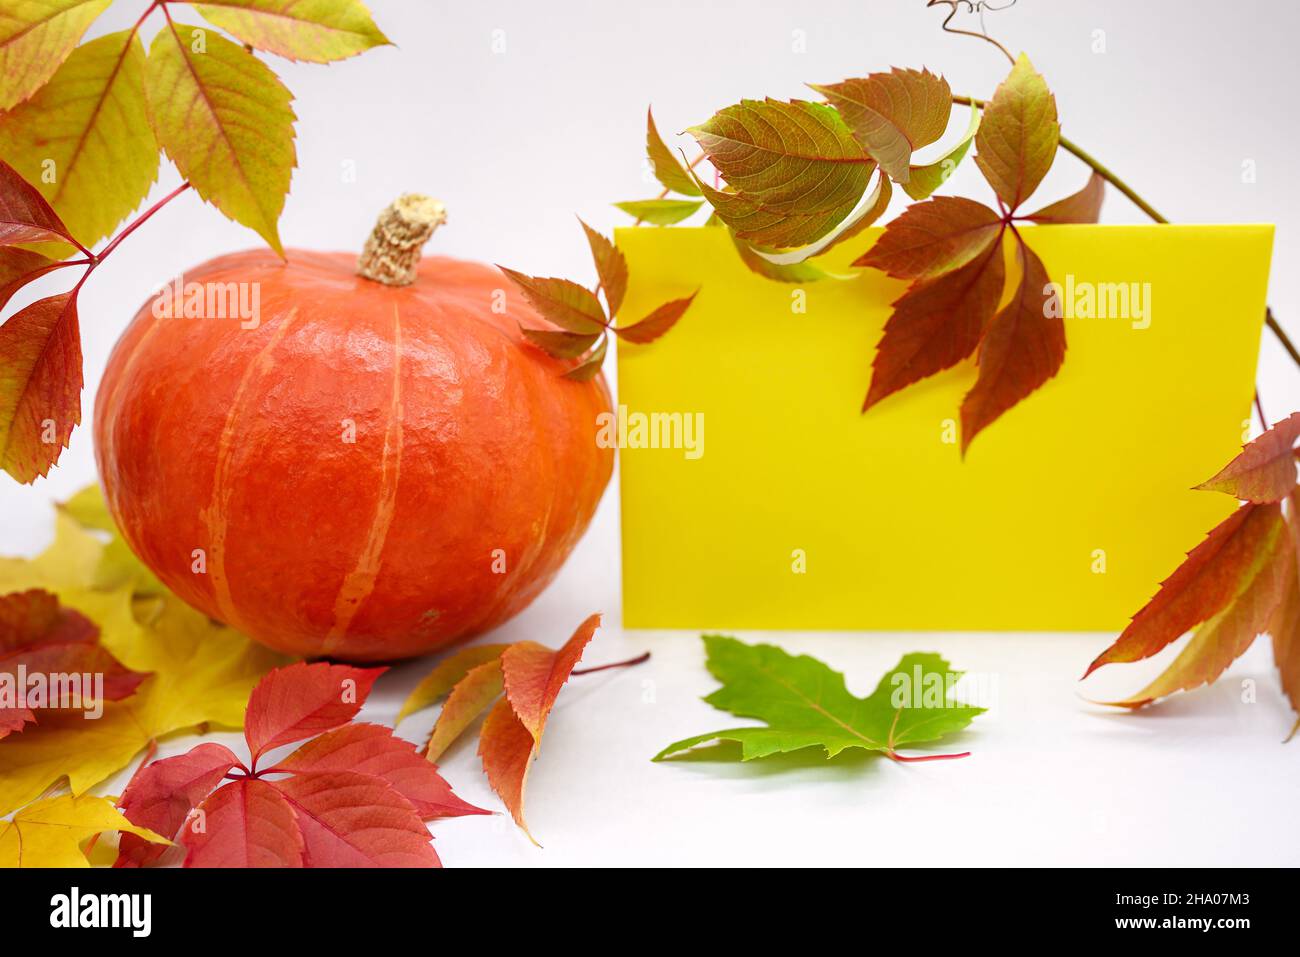 Autumn composition. Round orange pumpkin, autumn leaves of wild grapes and a yellow sheet of paper. White background, free space for text. Stock Photo